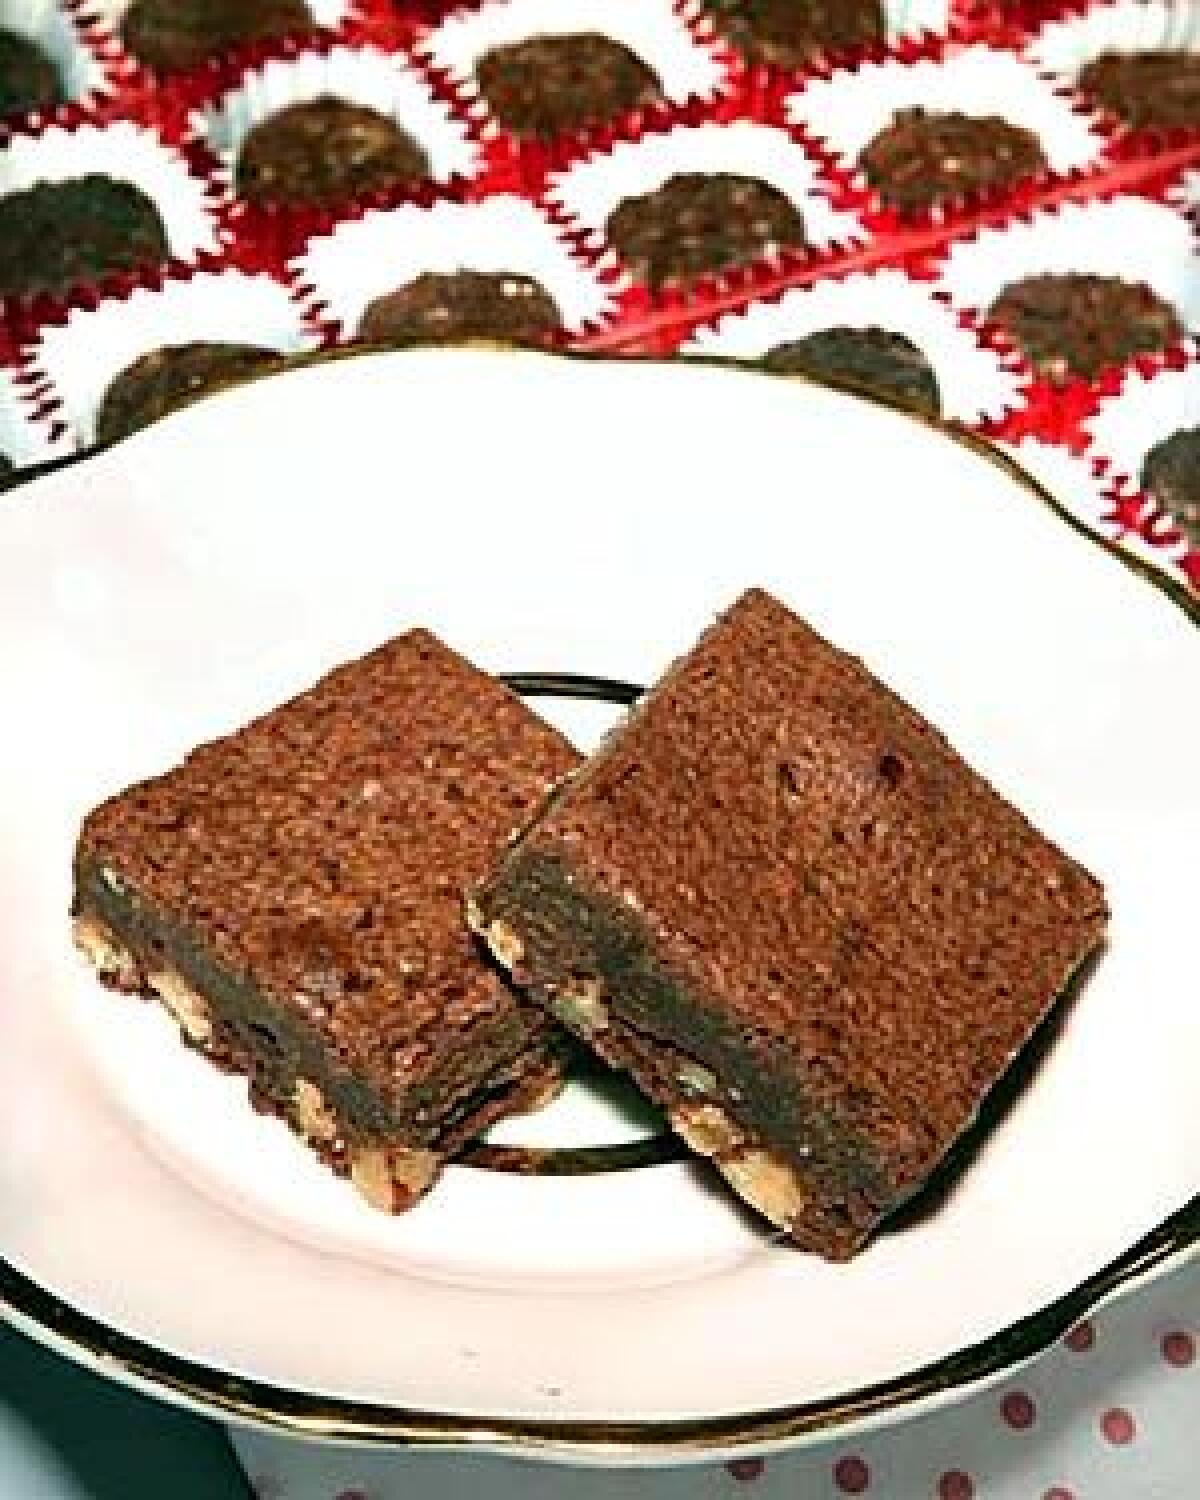 Brownie Bliss squares are packed with toasted pecans from farms in Texas and Georgia.